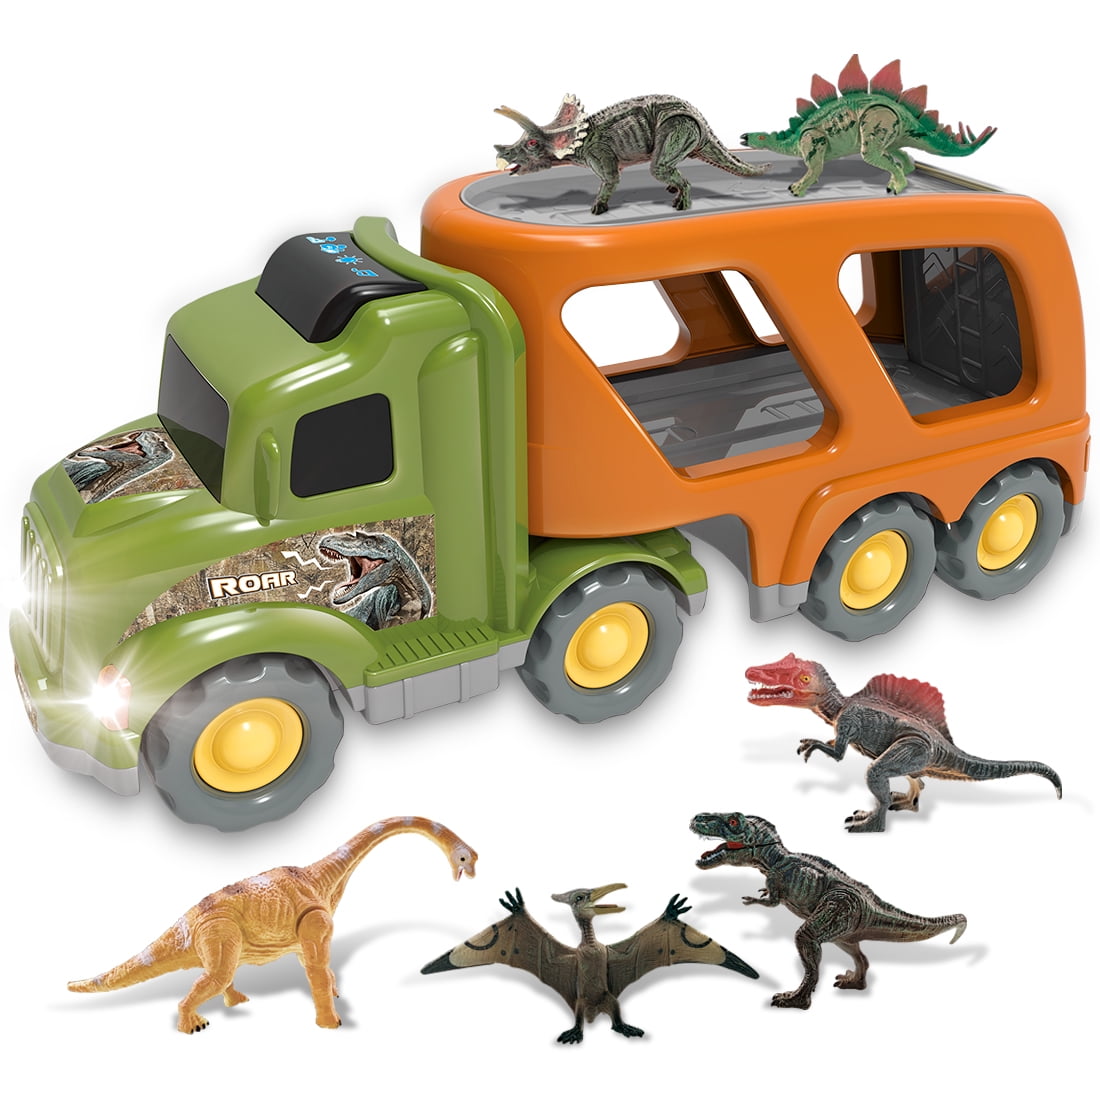 Dinosaur Toy Car Press Ejection Dinosaur Vehicle Toy Fall Resistance For  Bedroom